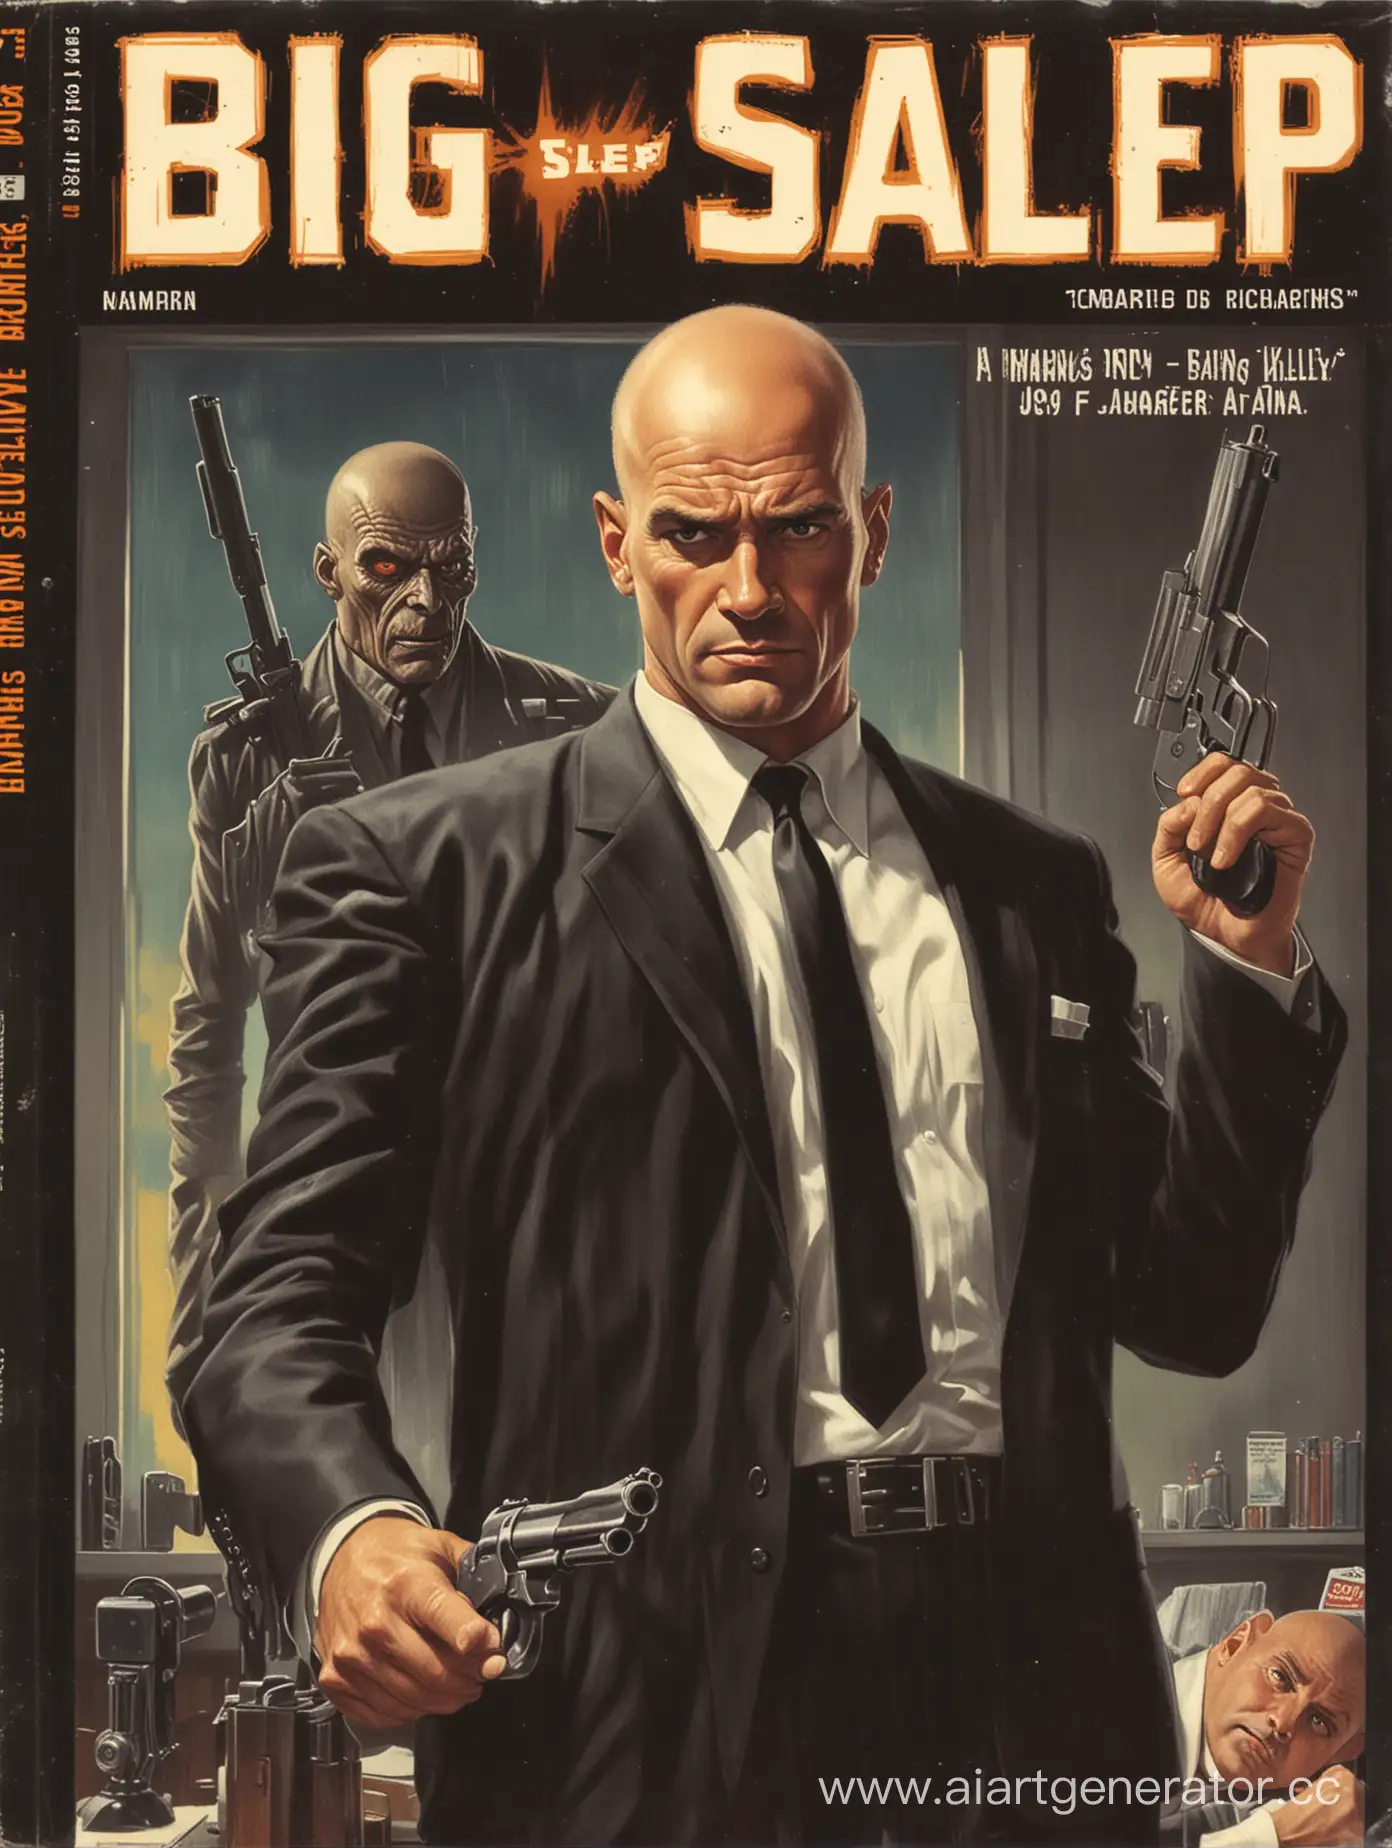 Create a 1950's lurid pulp fiction book cover with a bald man and a gun
The title of the book is "Big Sales Robot"